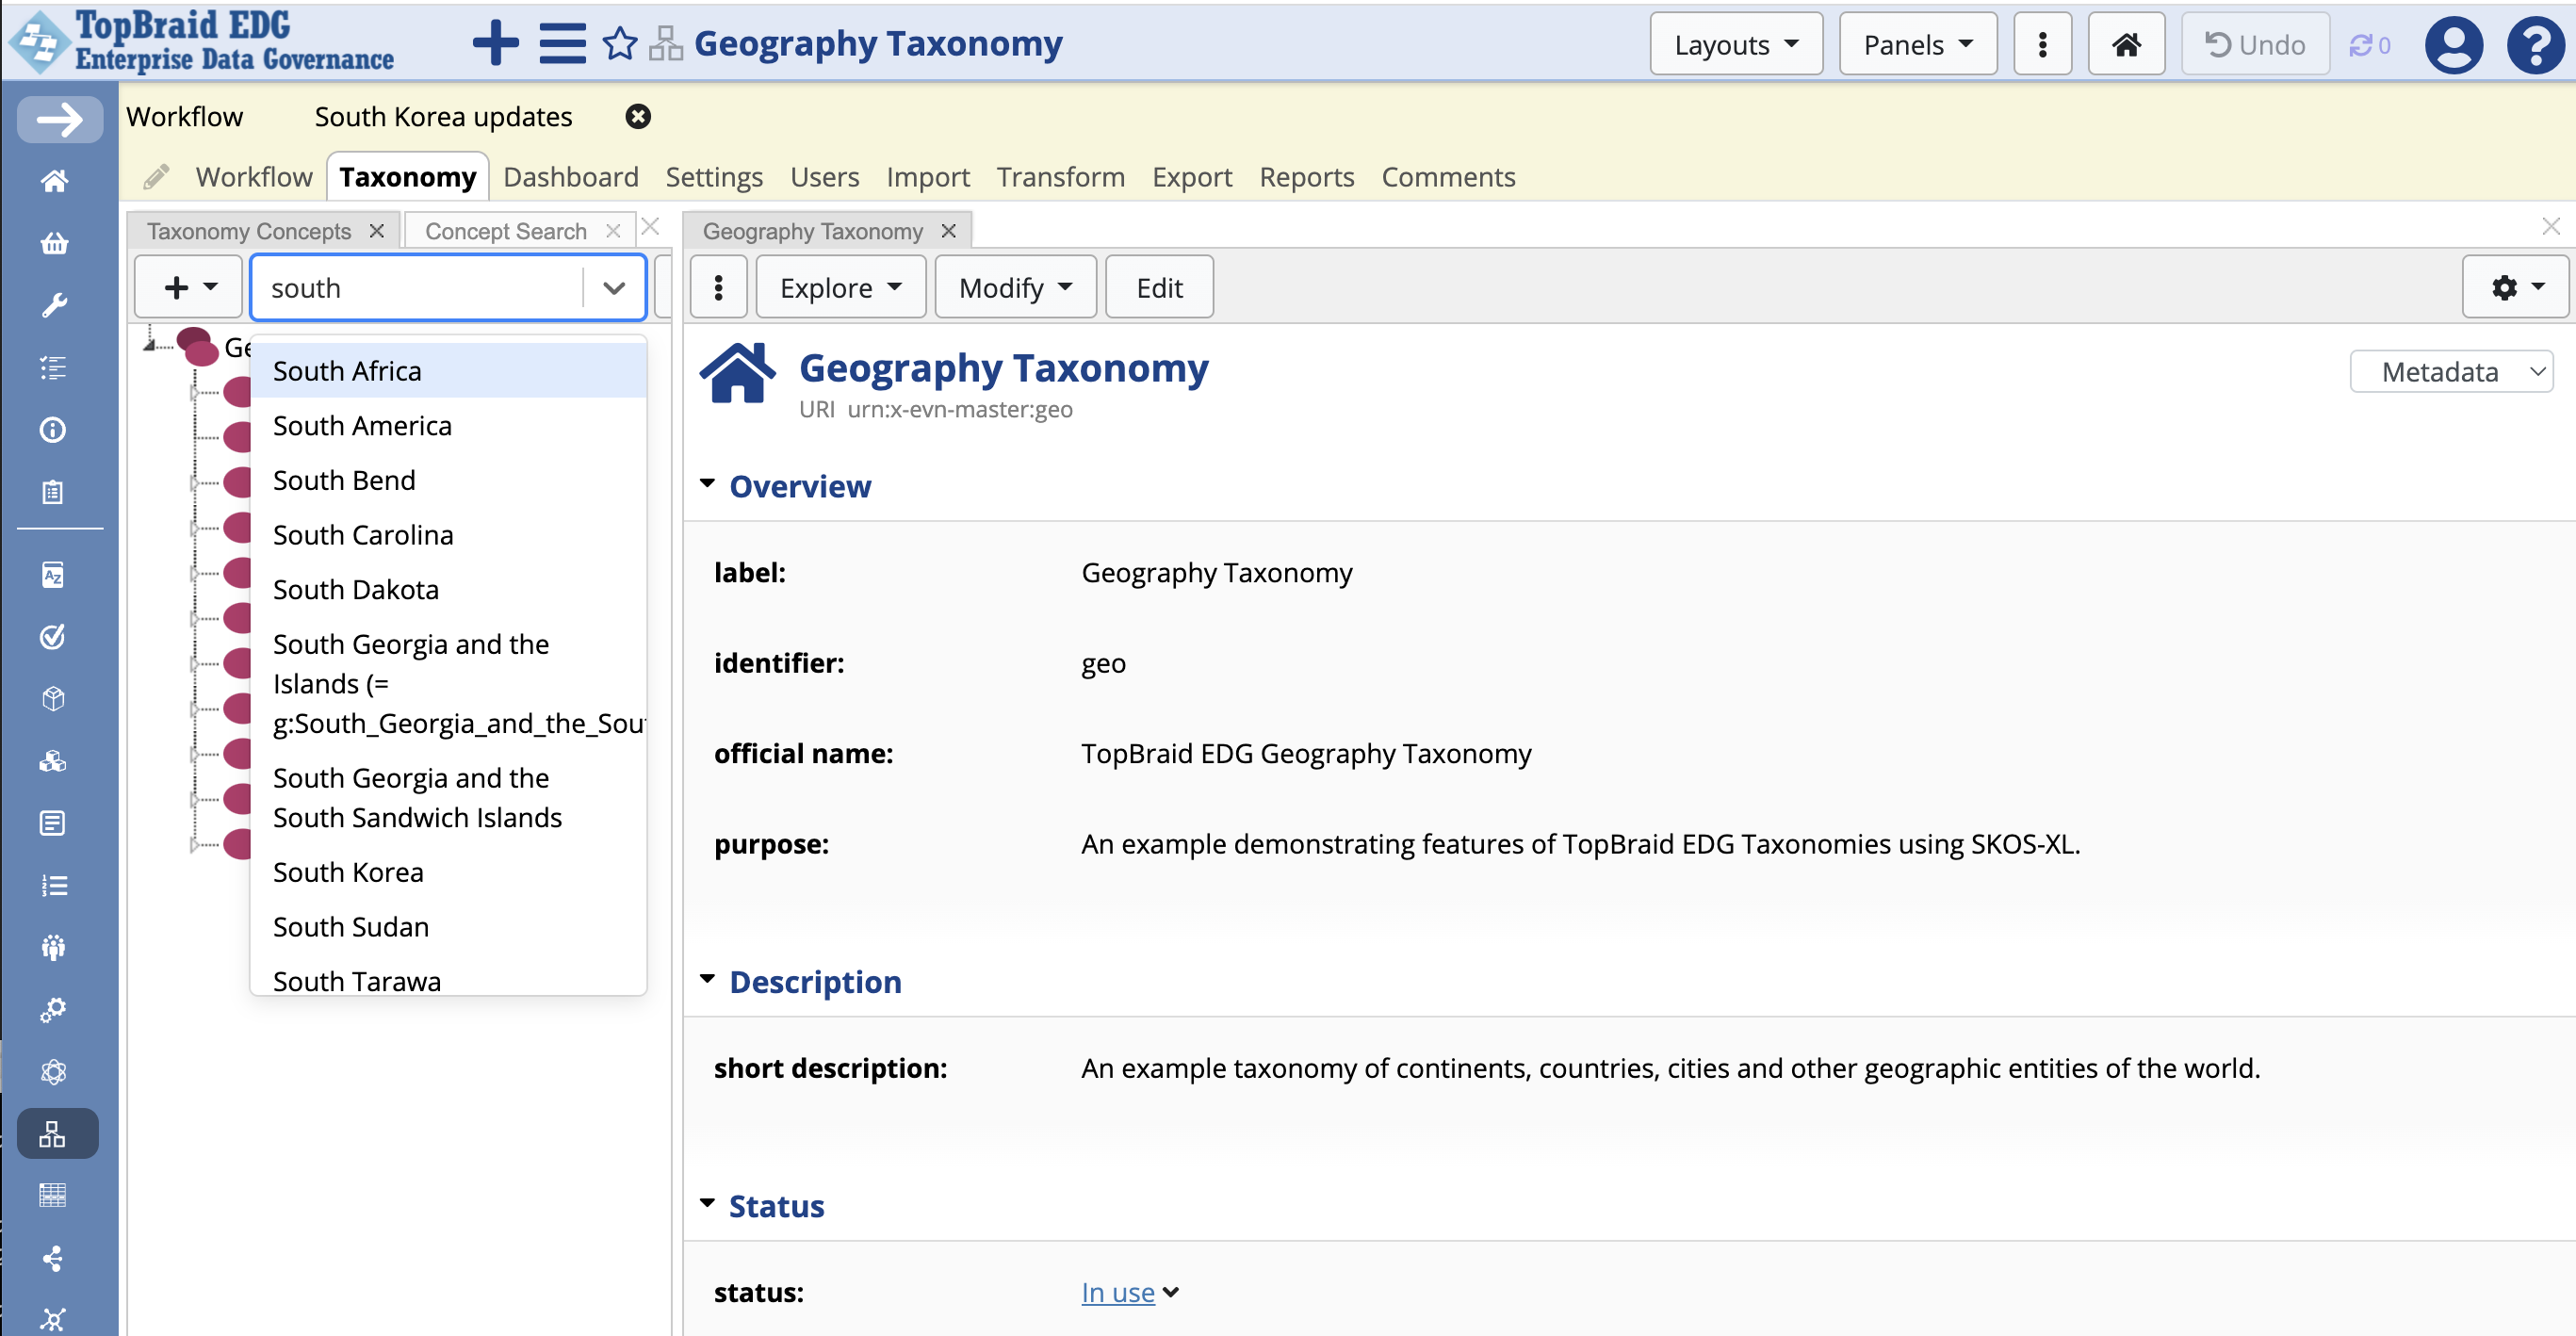 TopBraid EDG Geography Taxonomy Search Options